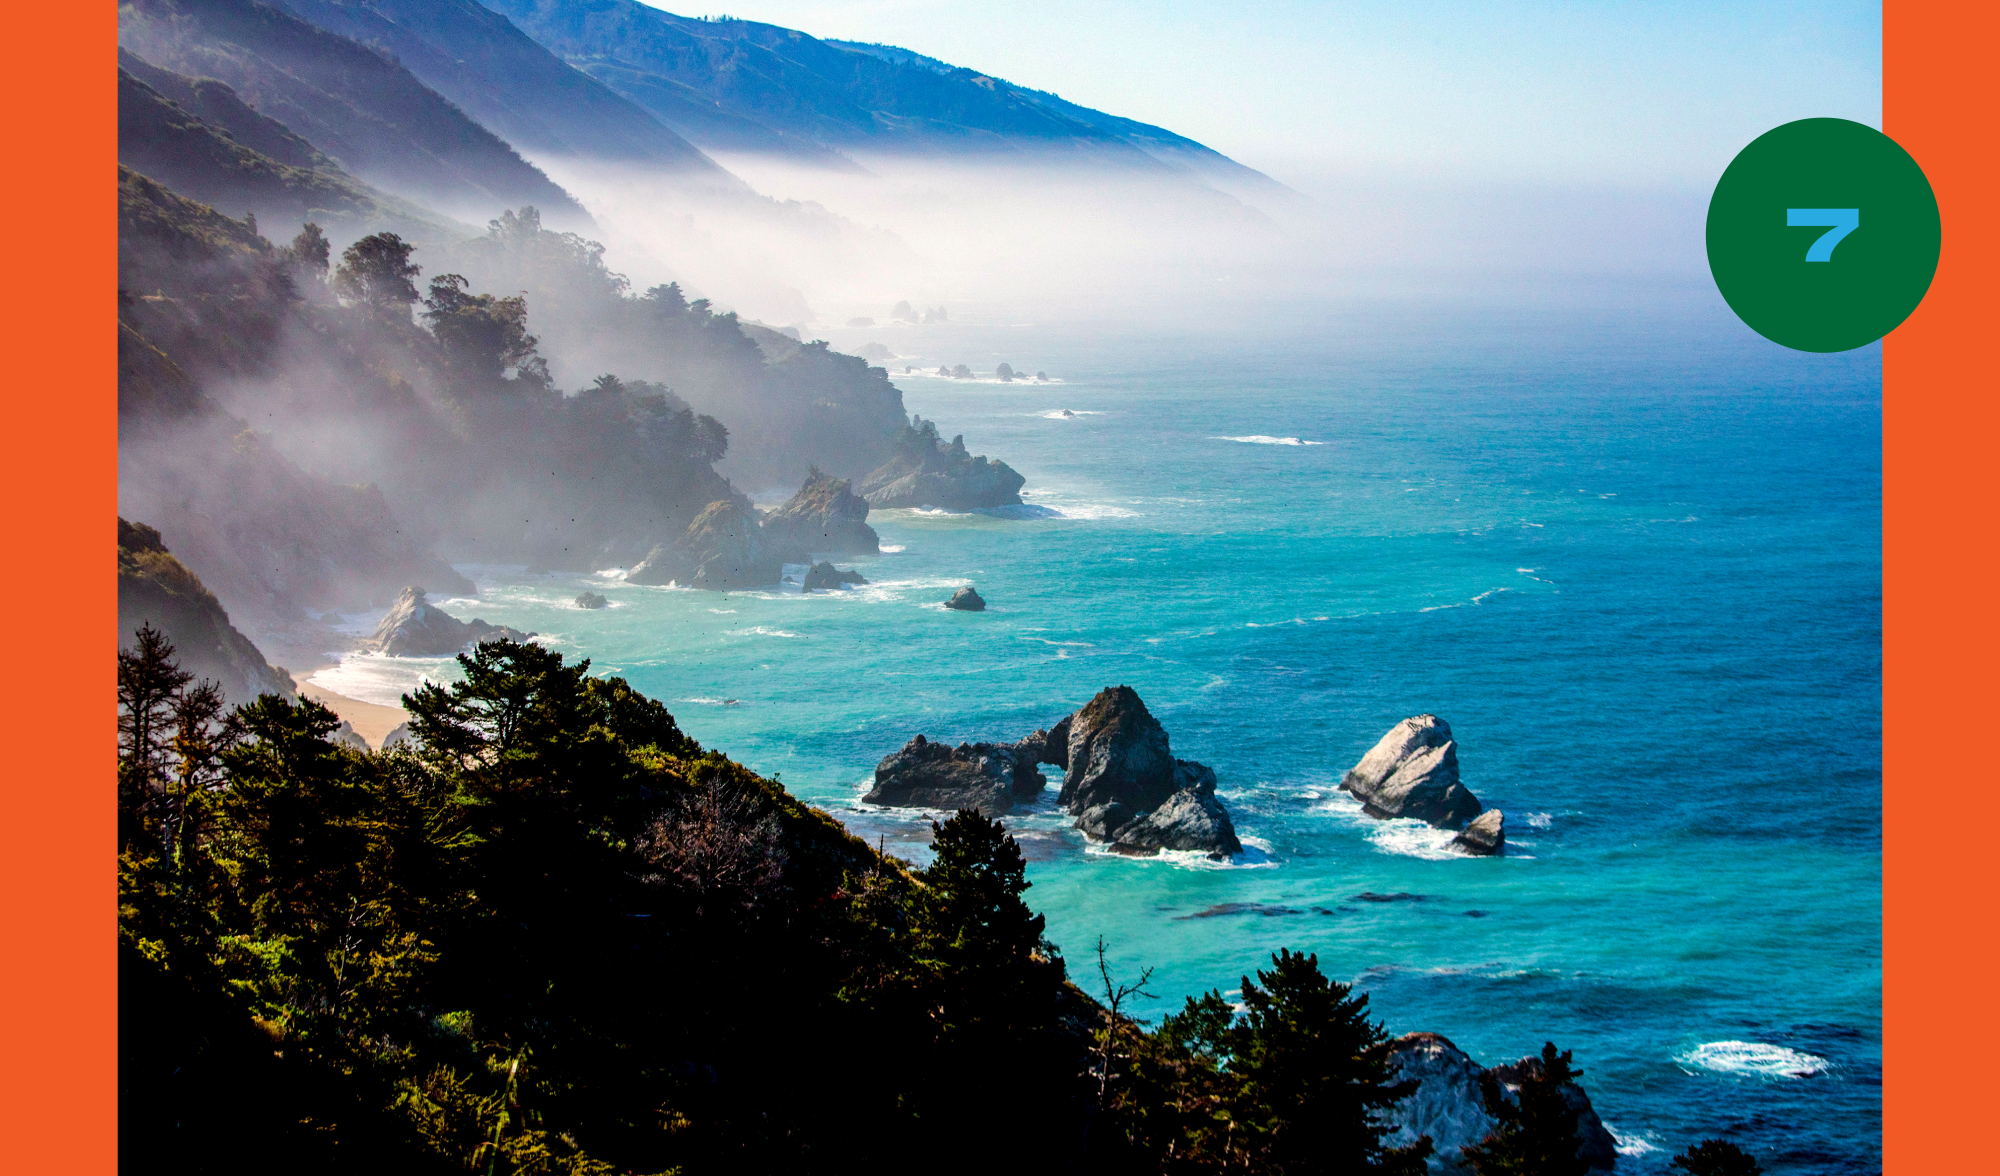 Cliffs rise out of the low clouds along the coastline of Julia Pfeiffer Burns State Park on California Highway 1